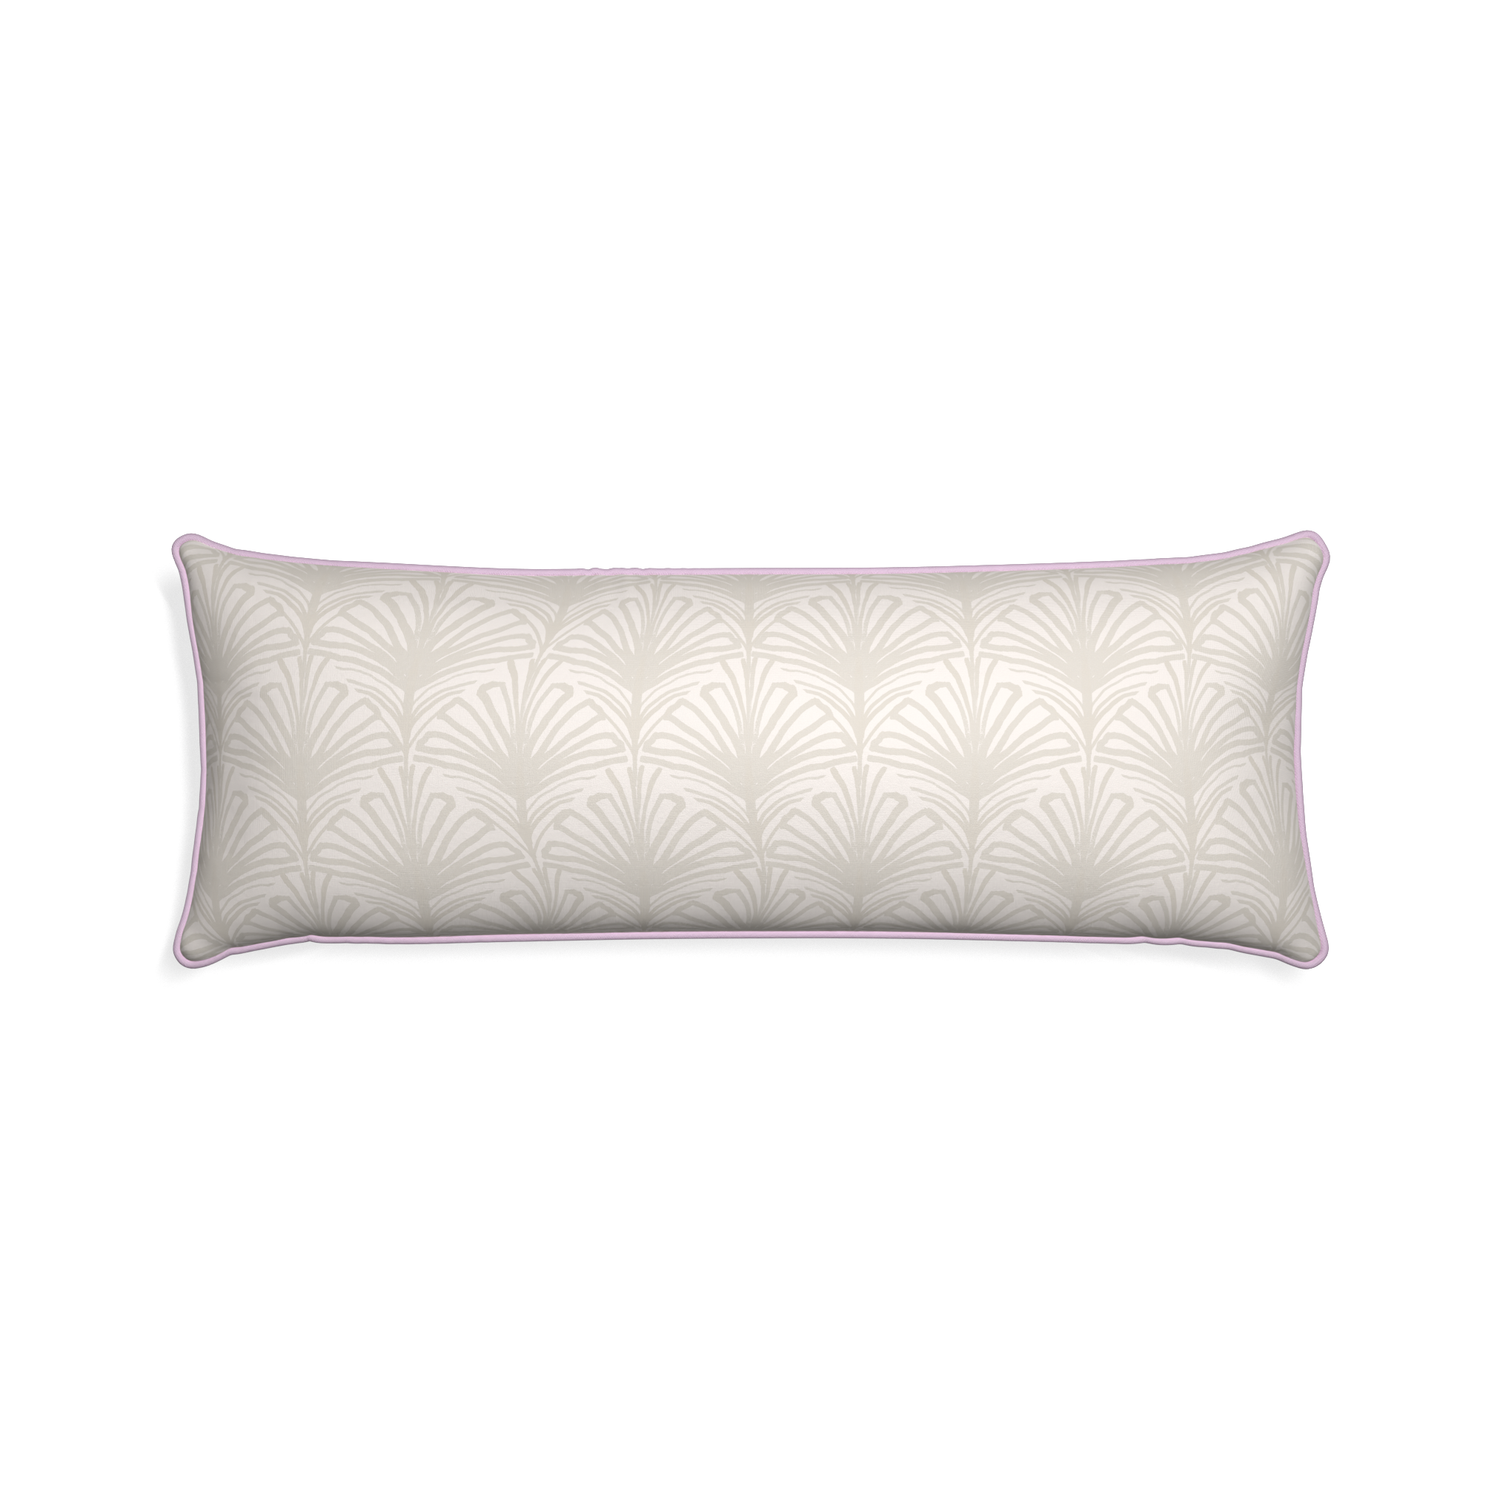 Xl-lumbar suzy sand custom pillow with l piping on white background